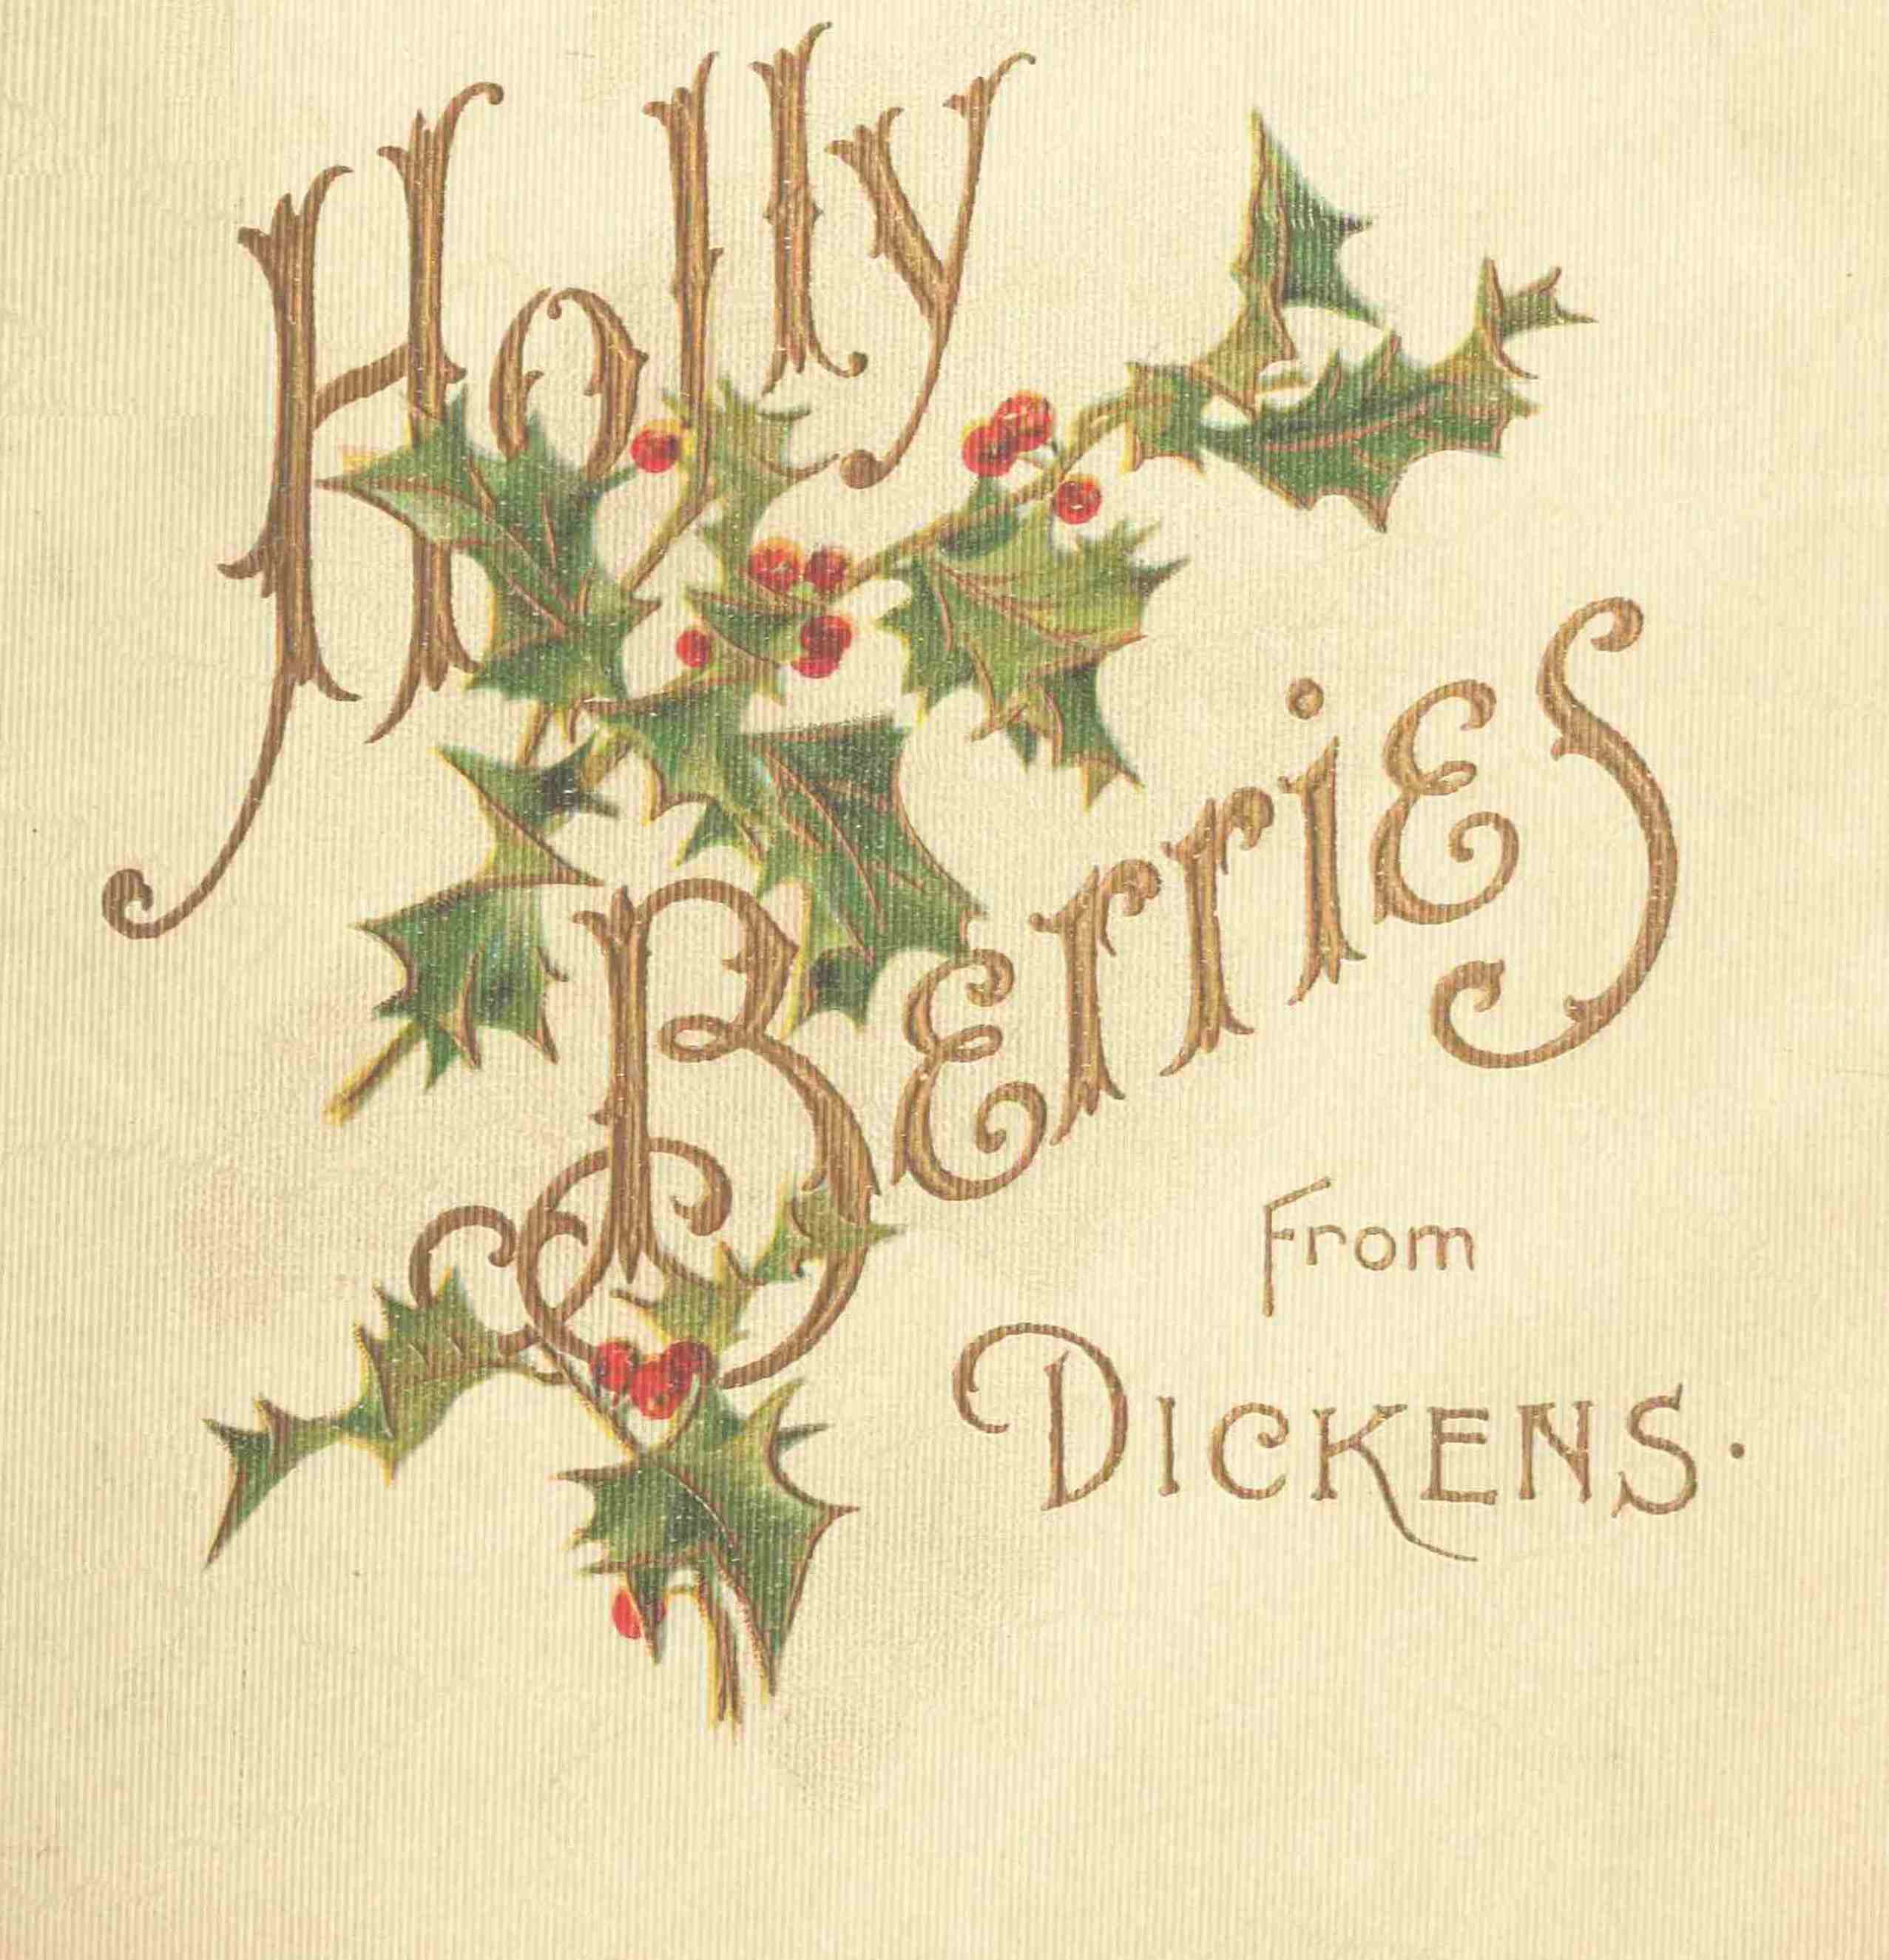 Holly berries from Dickens